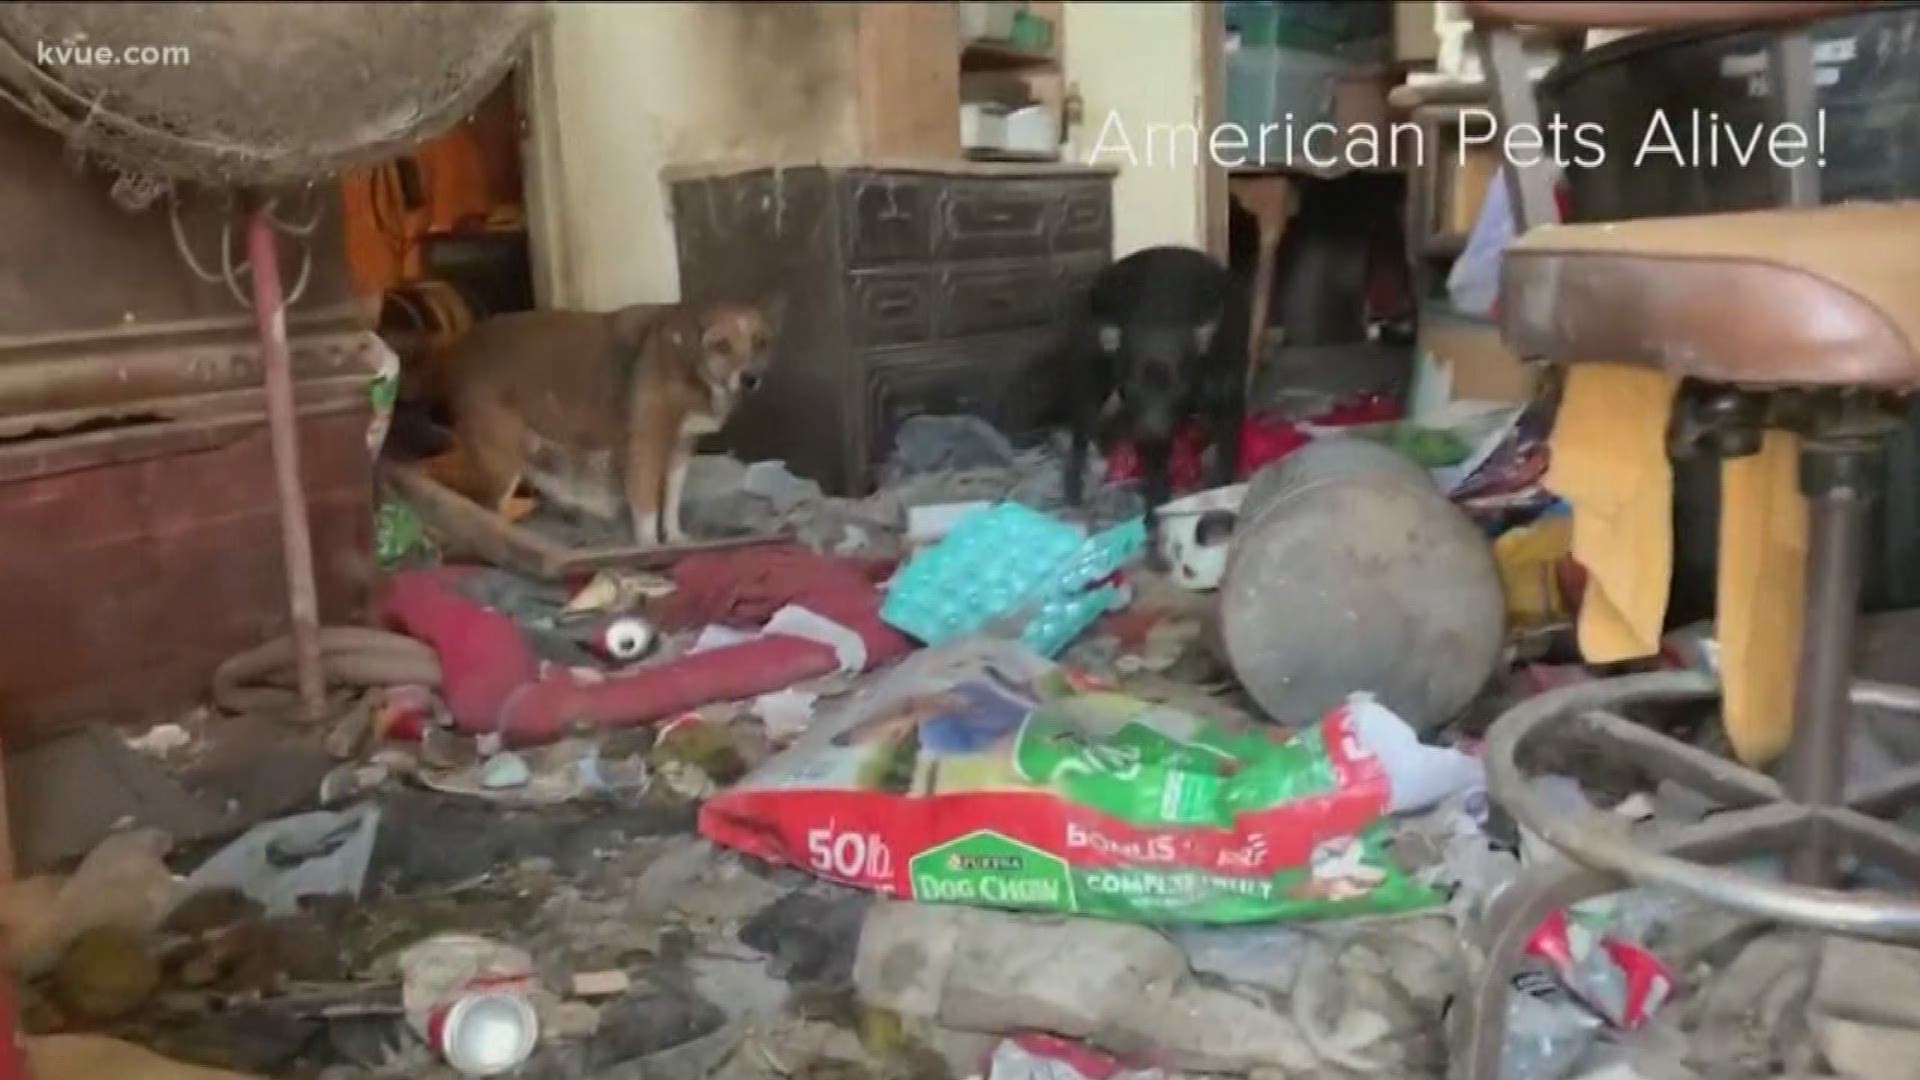 Austin Pets Alive! helps rescue 58 dogs at rural Texas property 